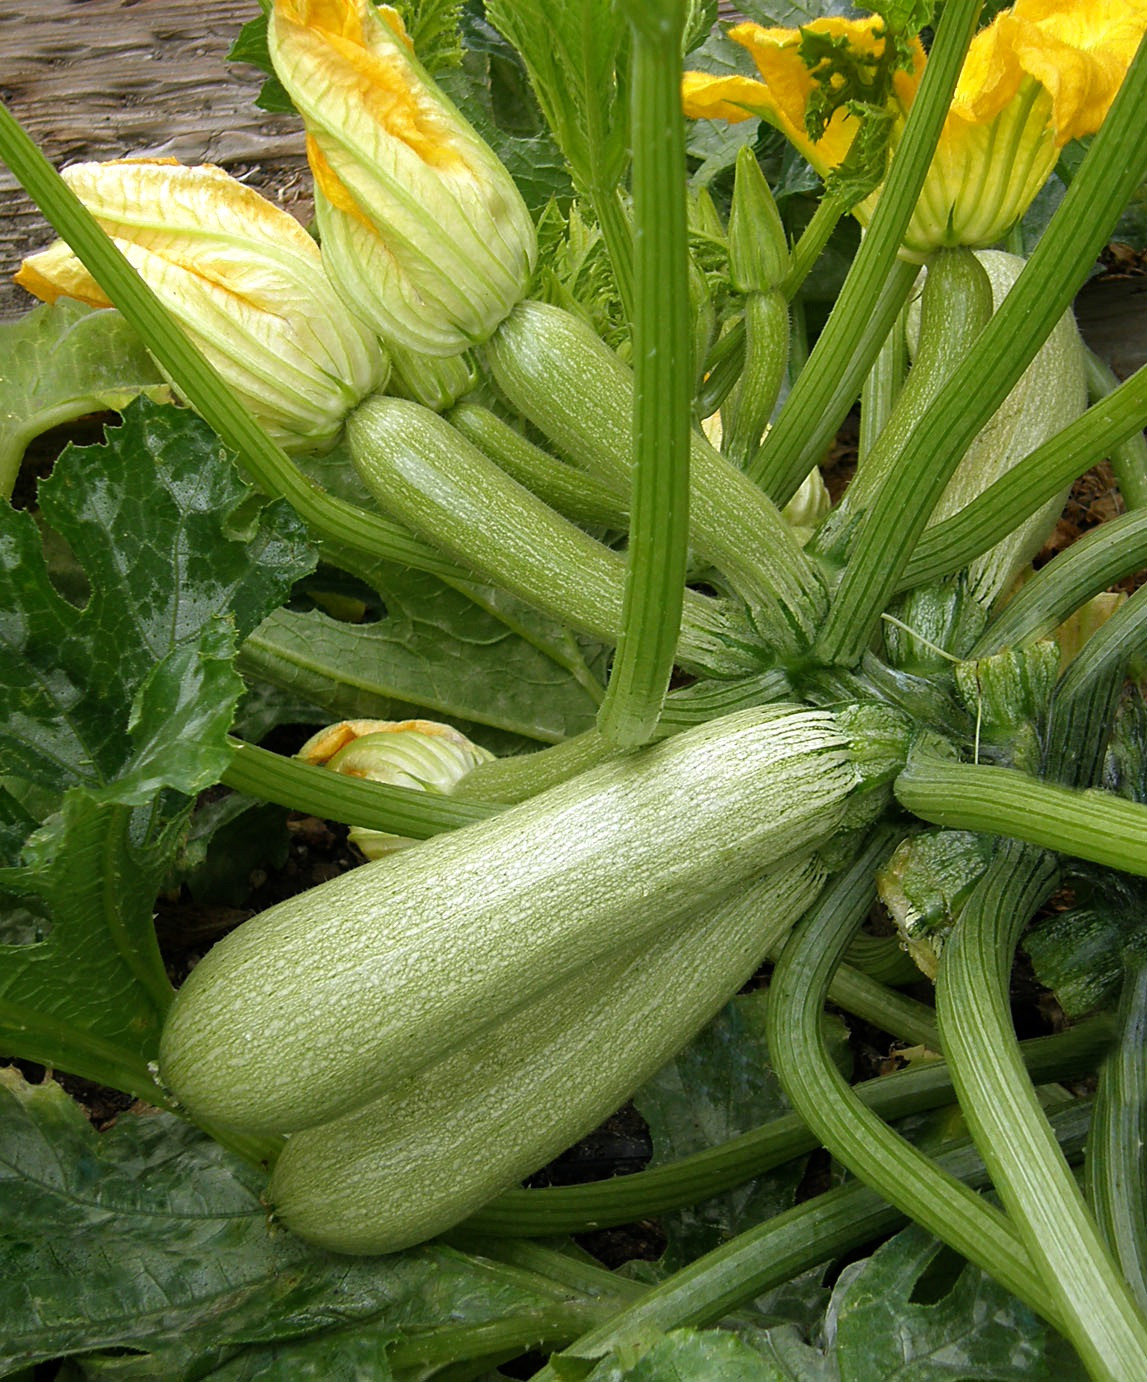 Types Of Summer Squash
 Use Squash For Your Summer Sides